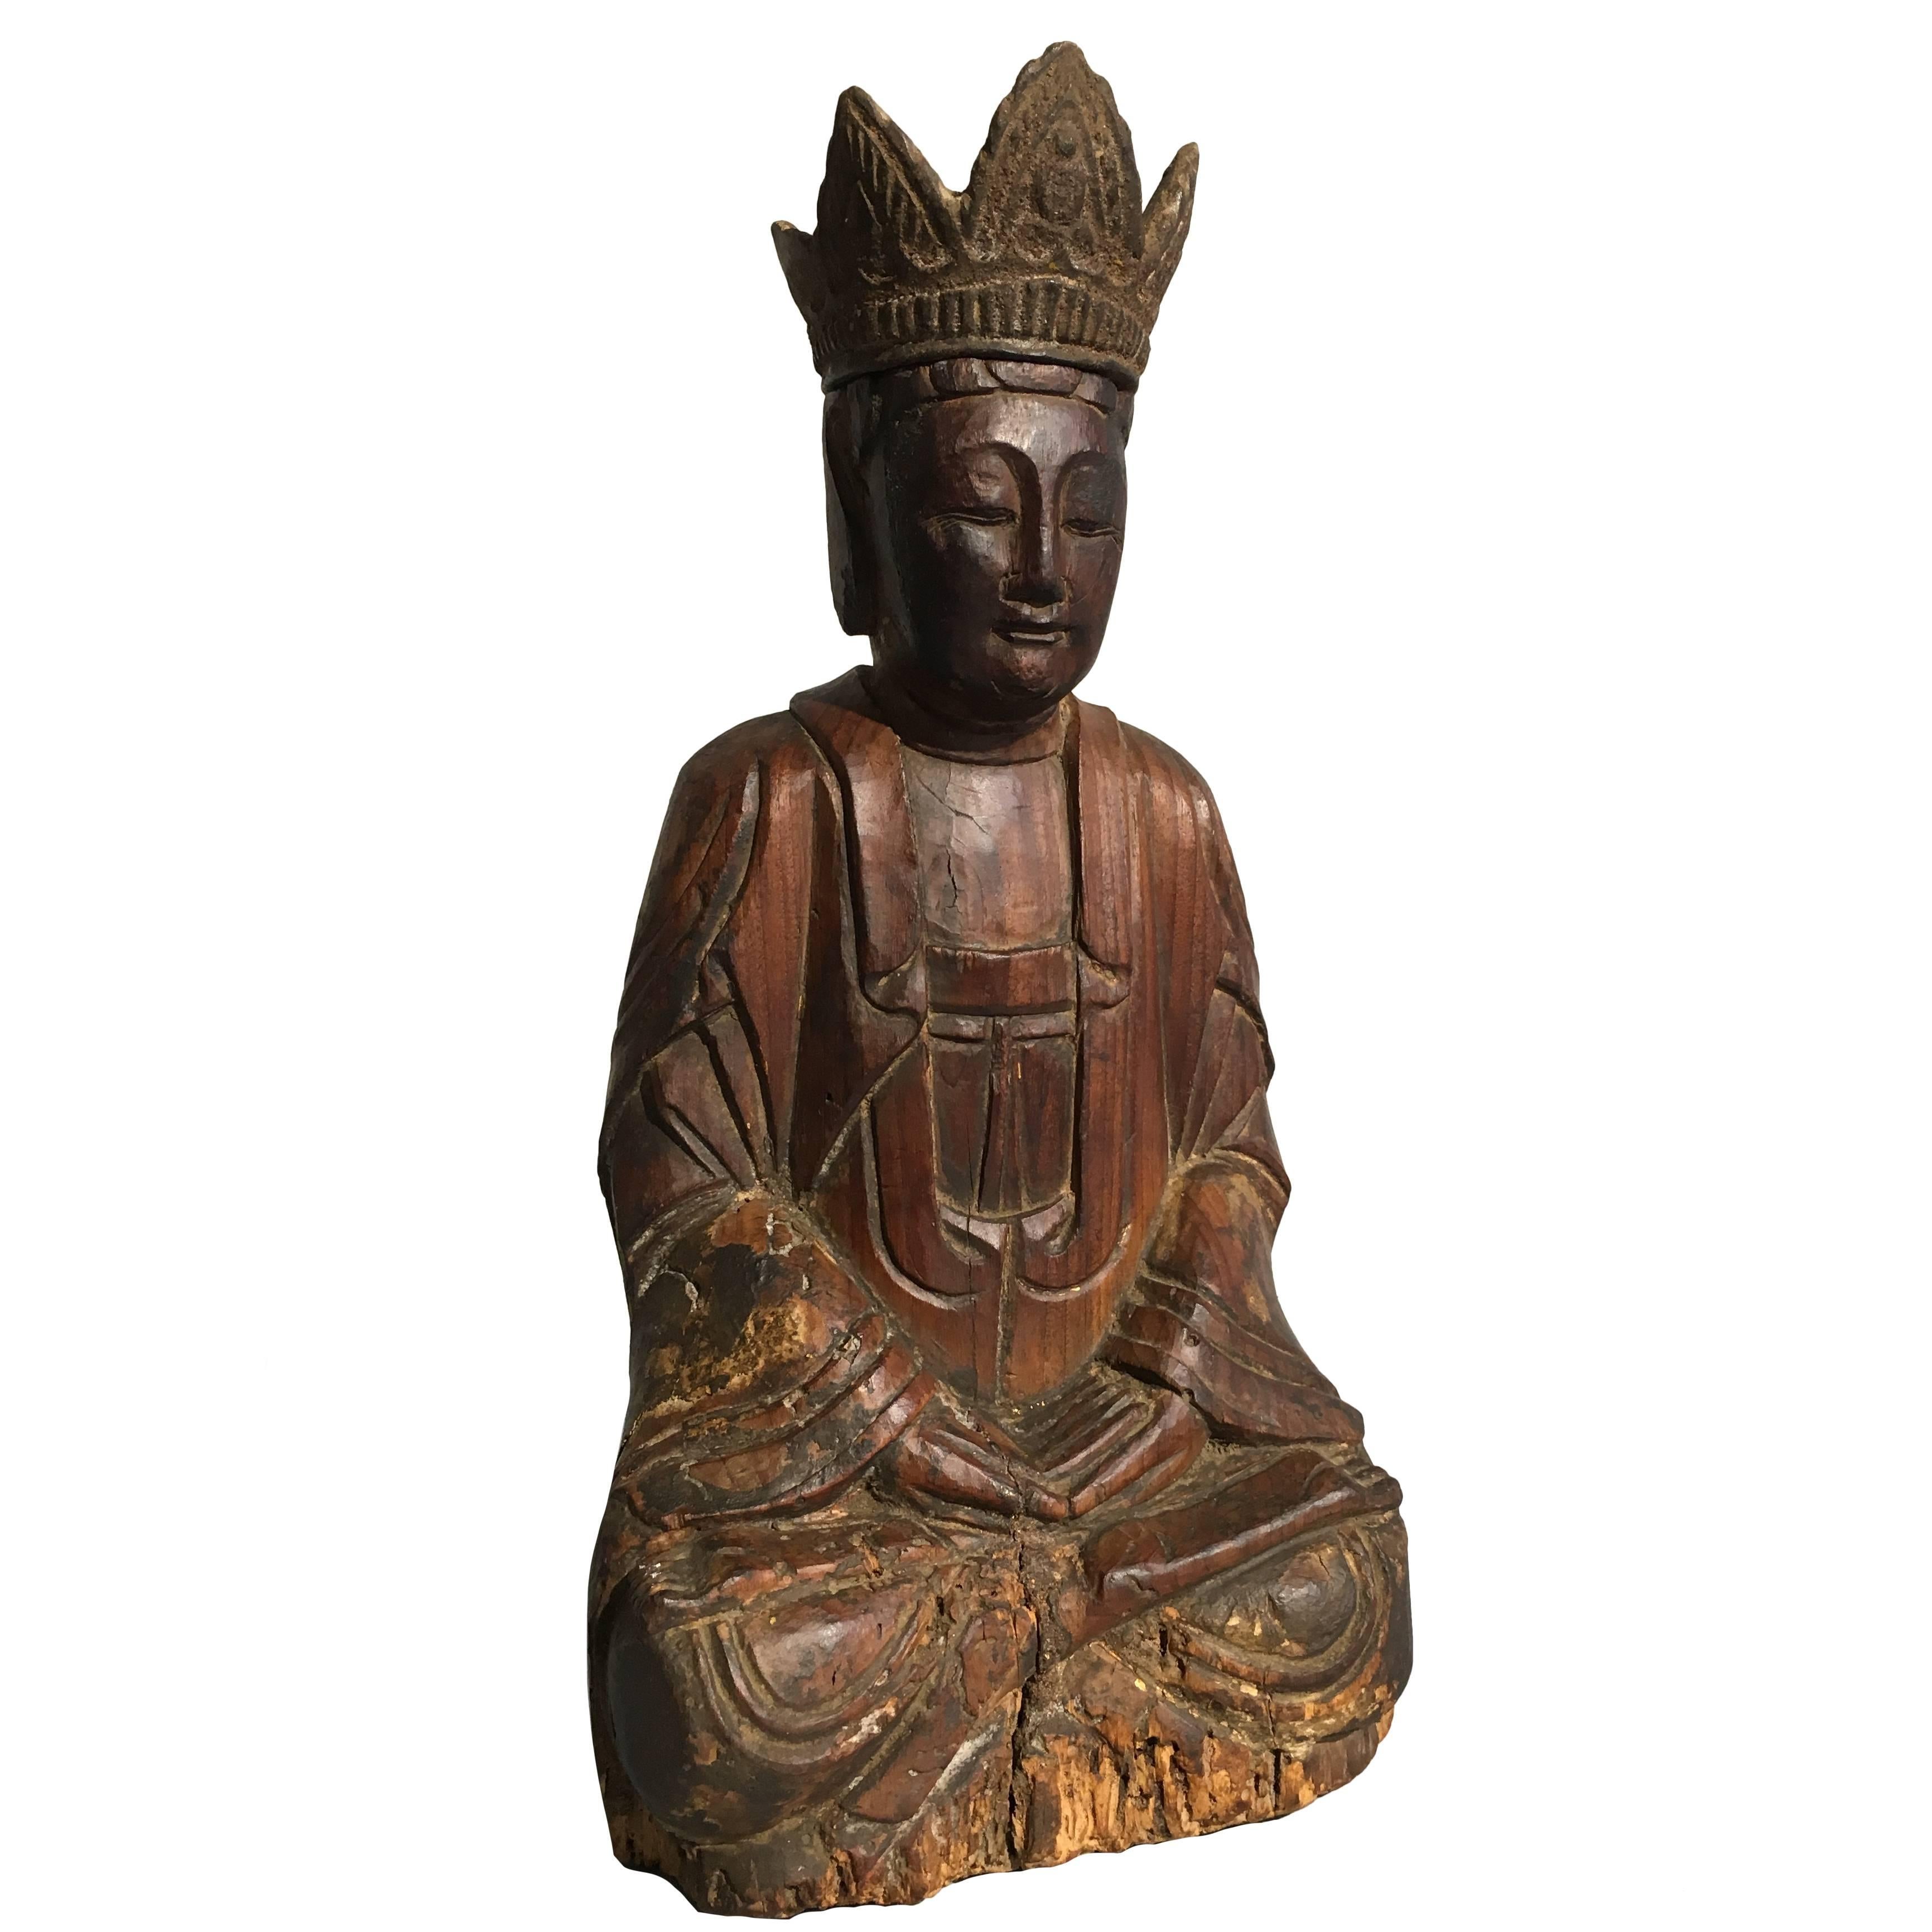 Chinese Carved Wood Bodhisattva Guanyin, Late Ming Dynasty, 17th Century